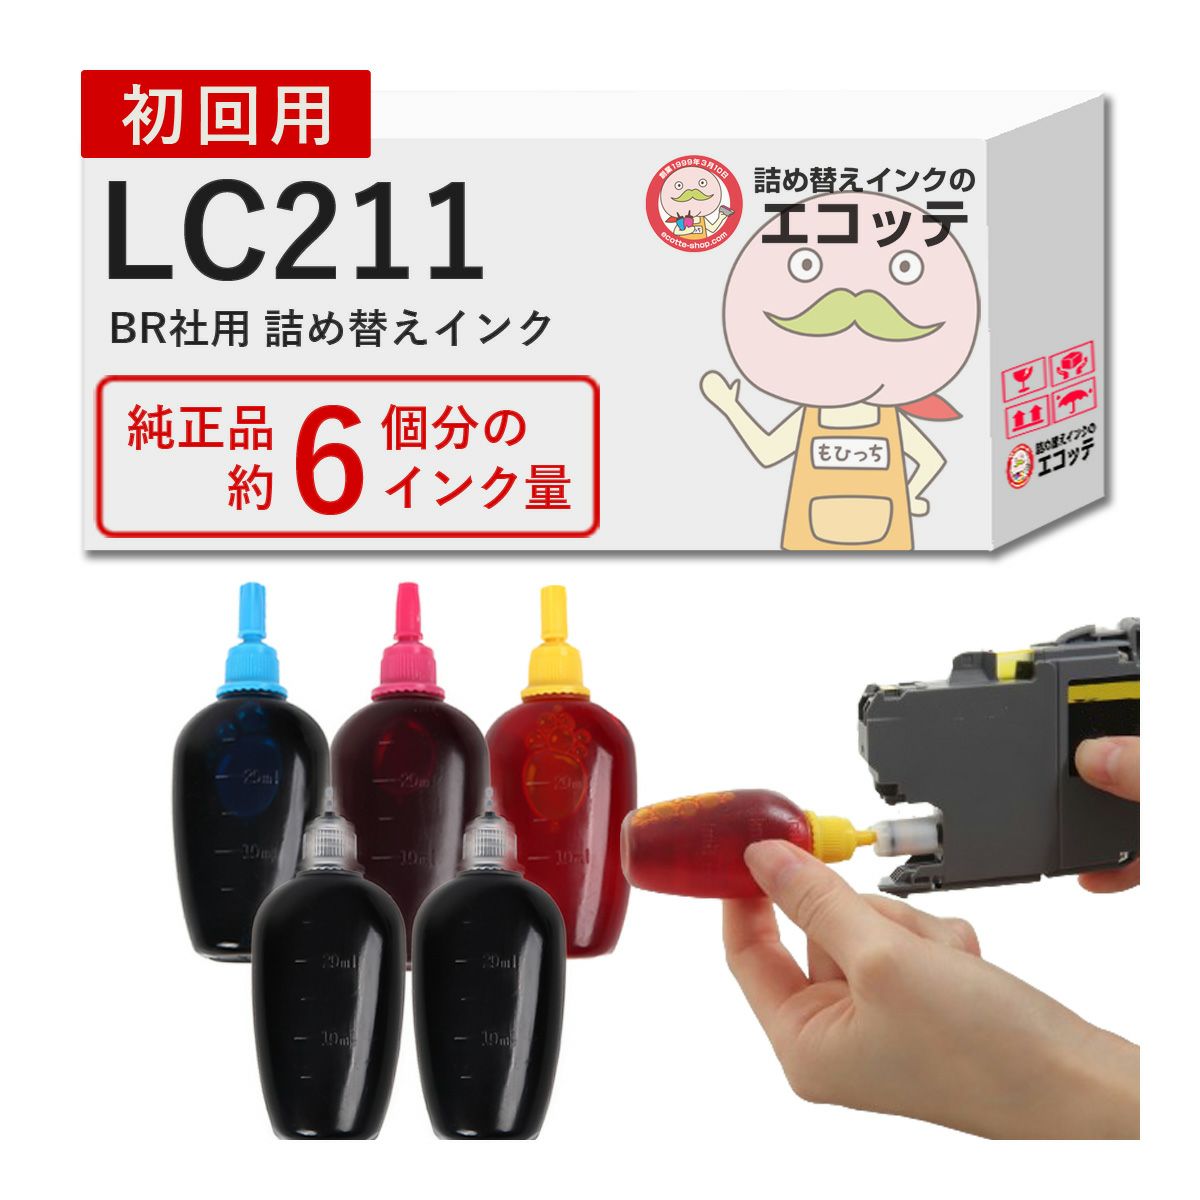 LC211-4PK brother ブラザー 詰め替えインク